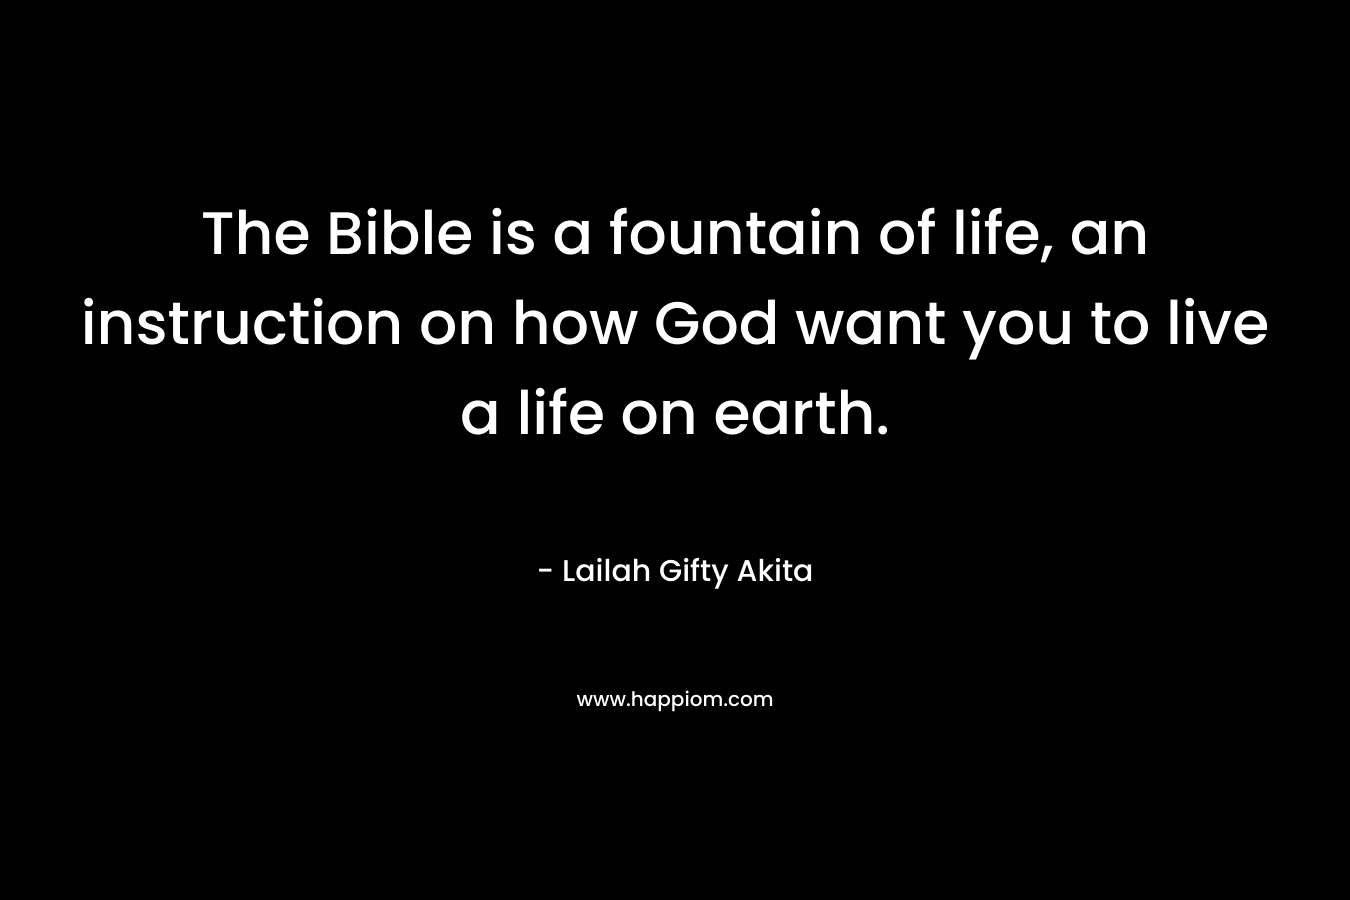 The Bible is a fountain of life, an instruction on how God want you to live a life on earth. – Lailah Gifty Akita